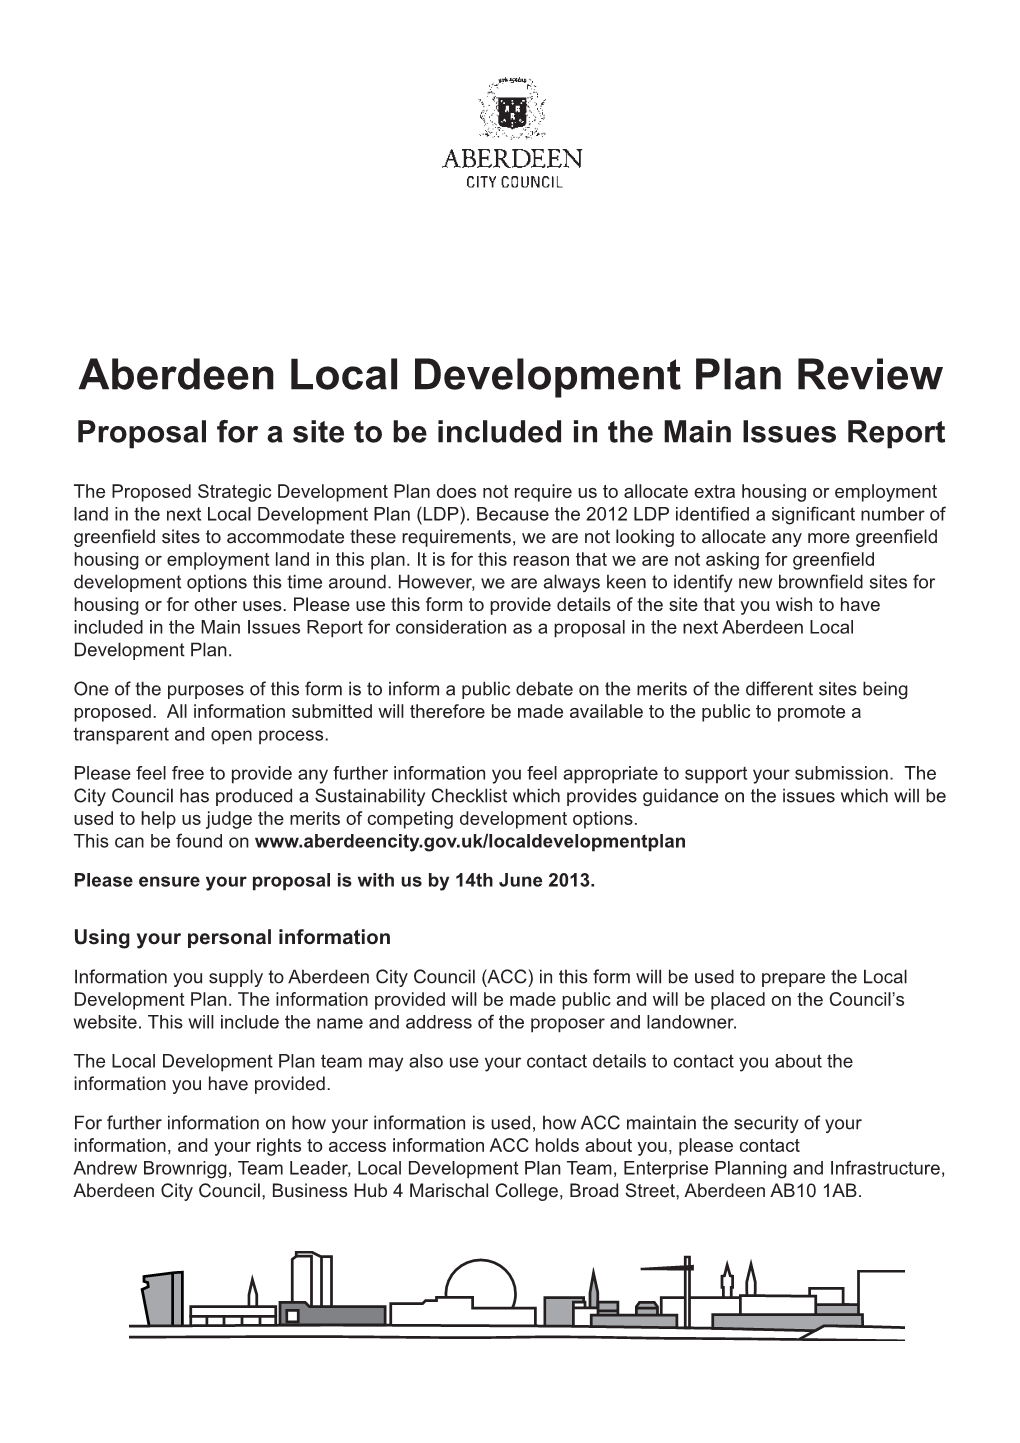 Aberdeen Local Development Plan Review Proposal for a Site to Be Included in the Main Issues Report